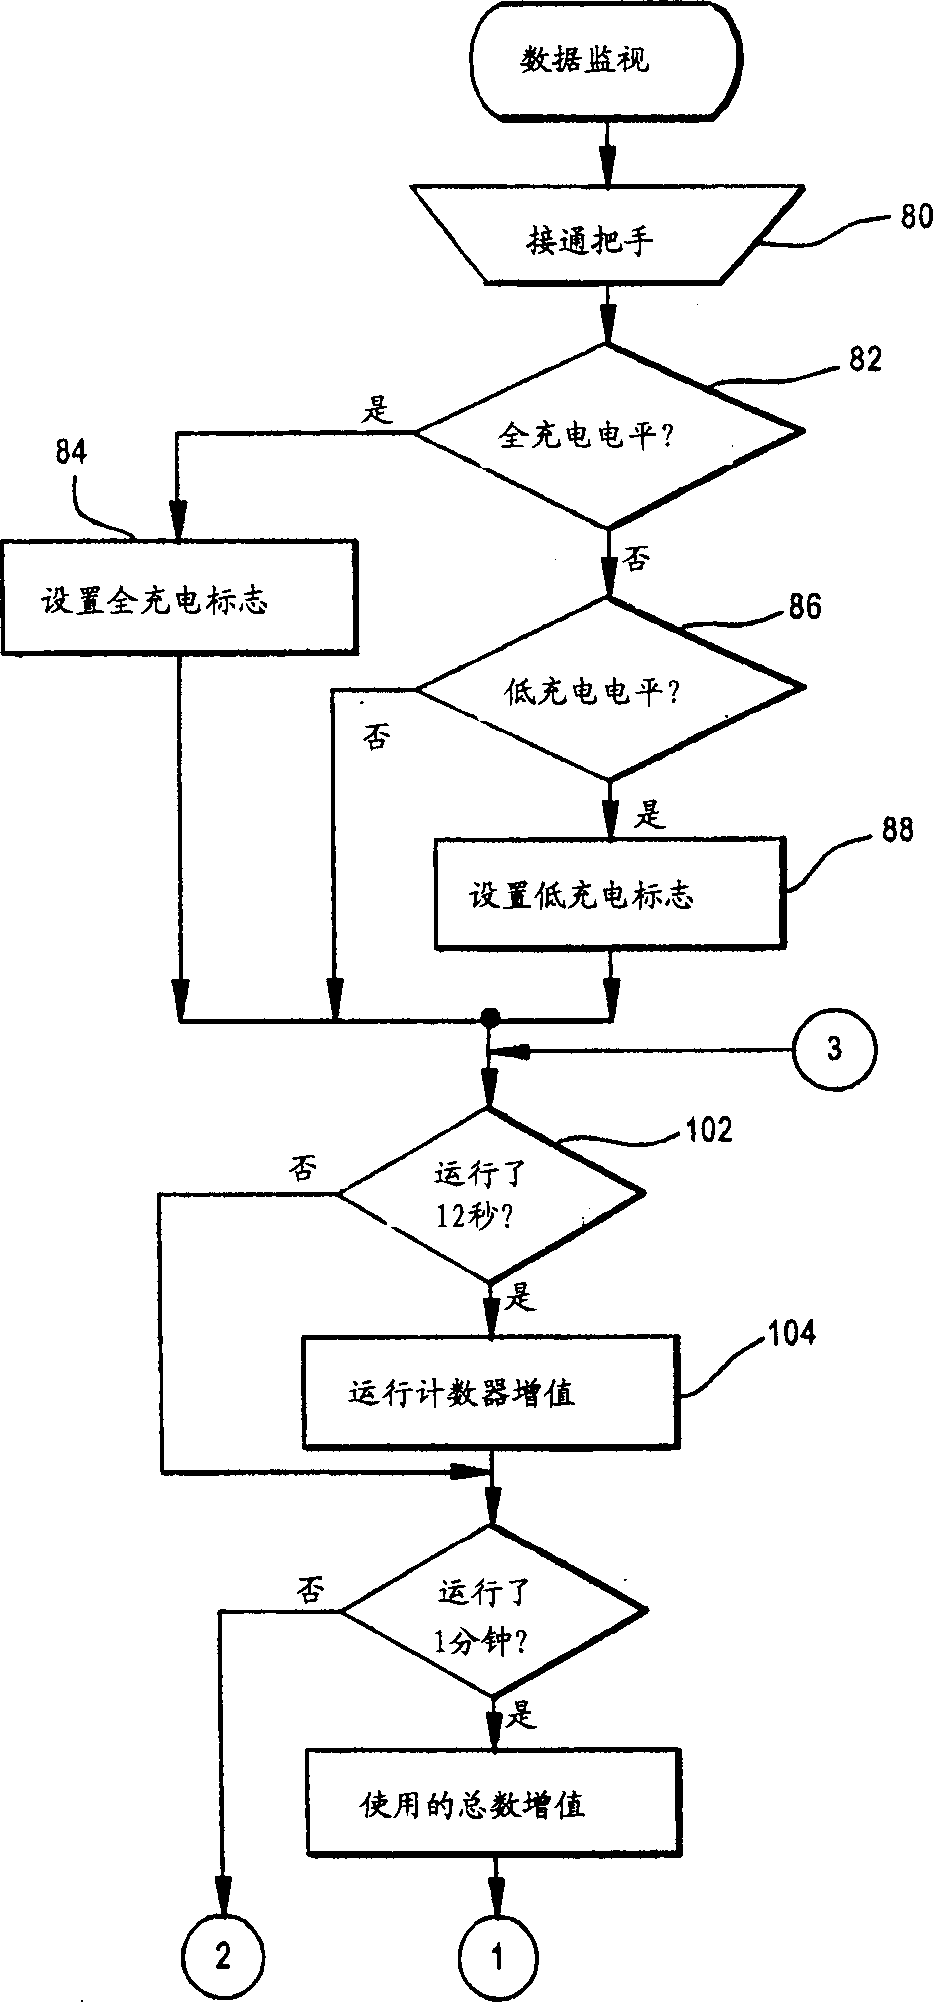 System for communicating operational data between electric toothbrush and separate control unit